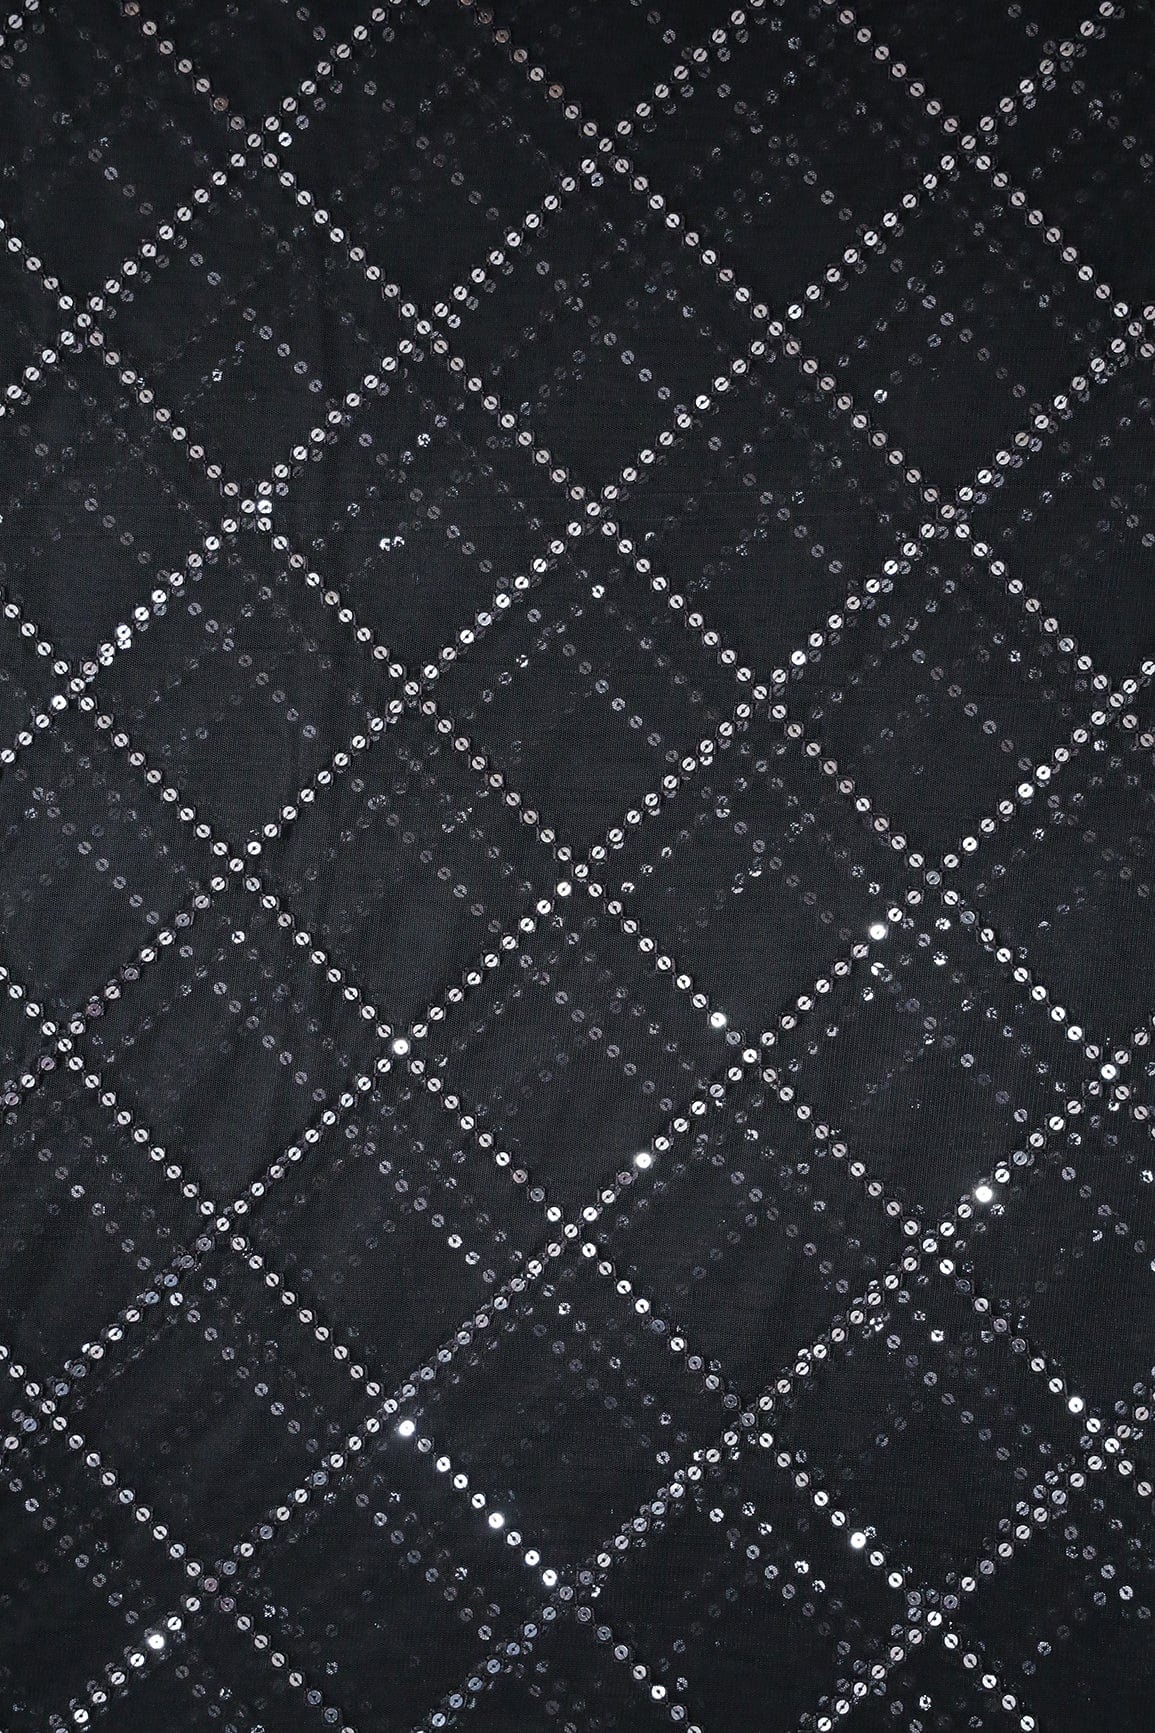 doeraa Embroidery Fabrics Silver Sequins With Thread Checks Embroidery Work On Black Soft Net Fabric